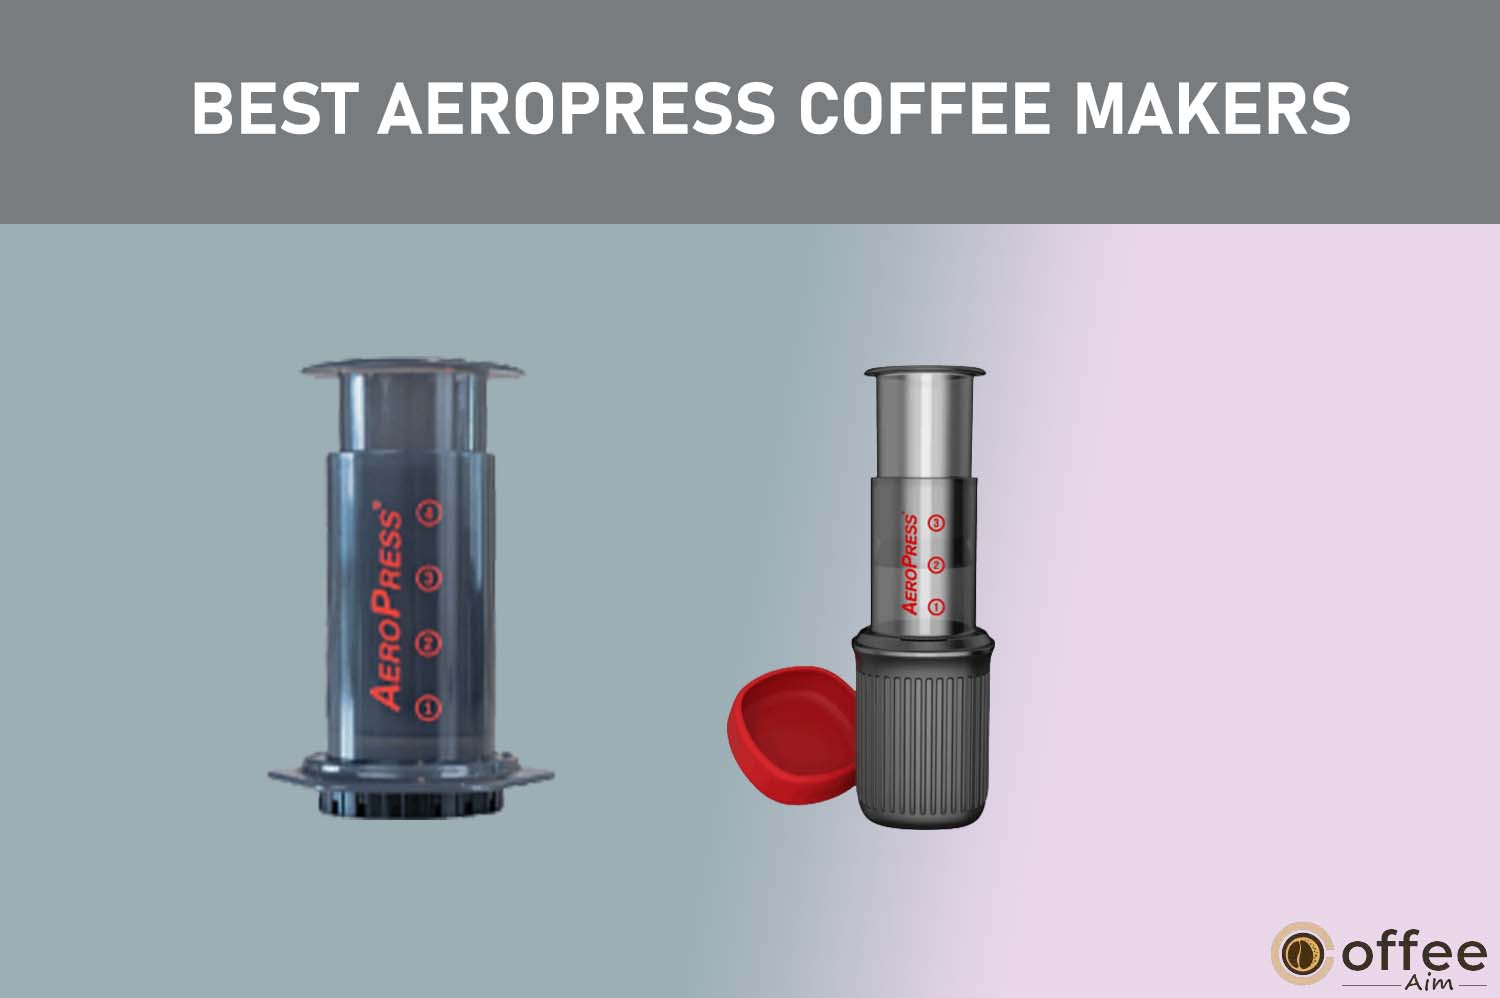 Featured image for the article "Best Aeropress Coffee Makers"